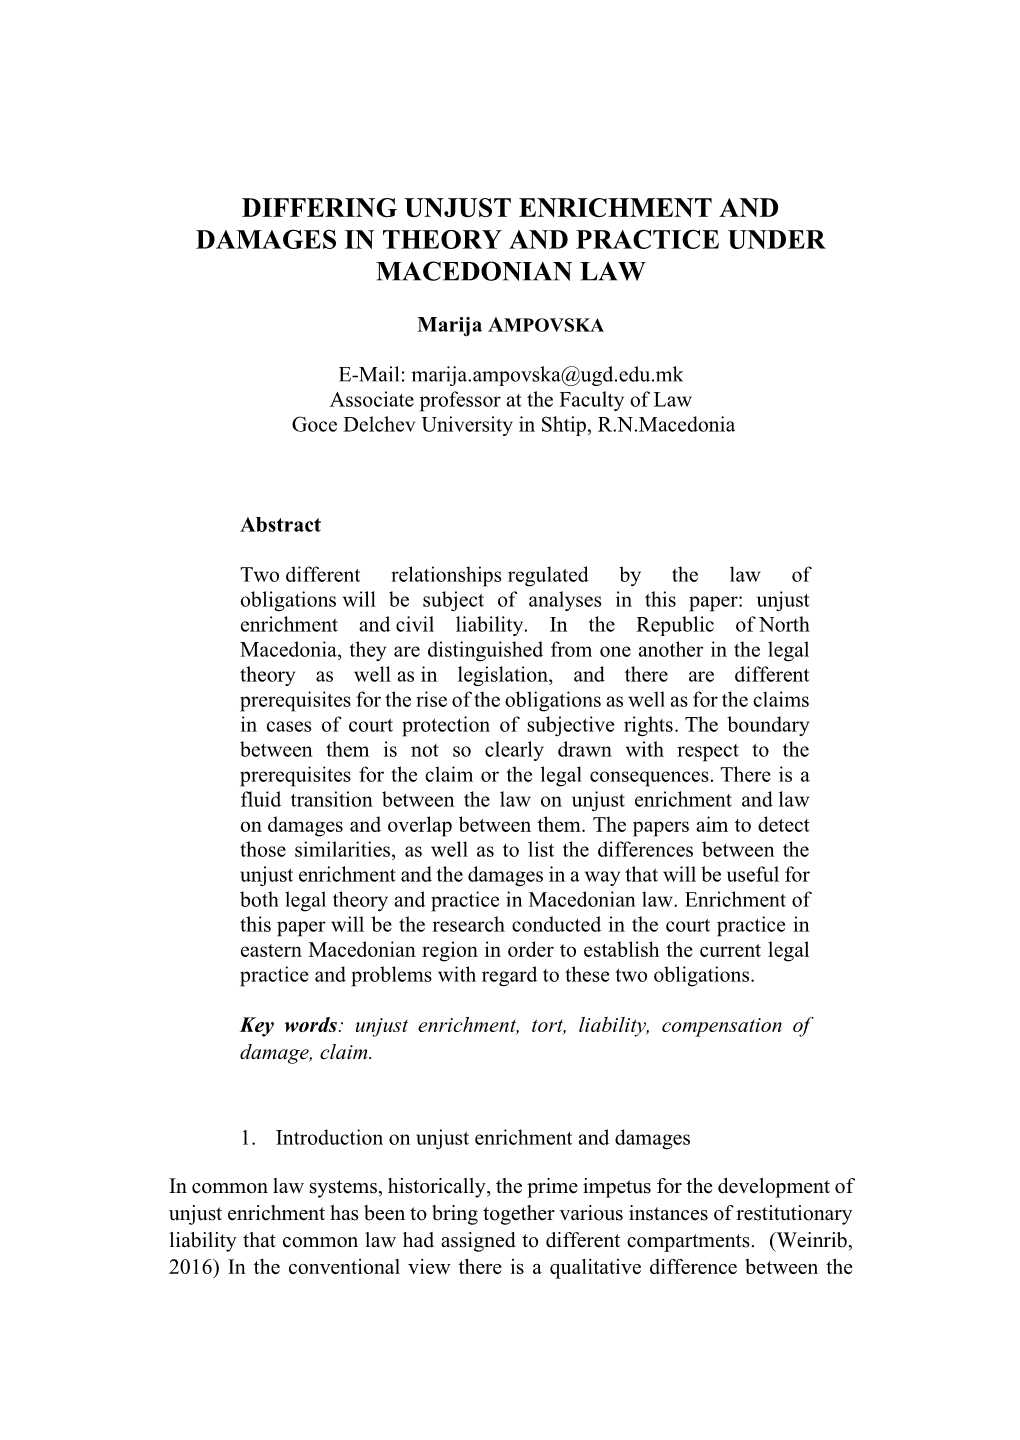 Differing Unjust Enrichment and Damages in Theory and Practice Under Macedonian Law